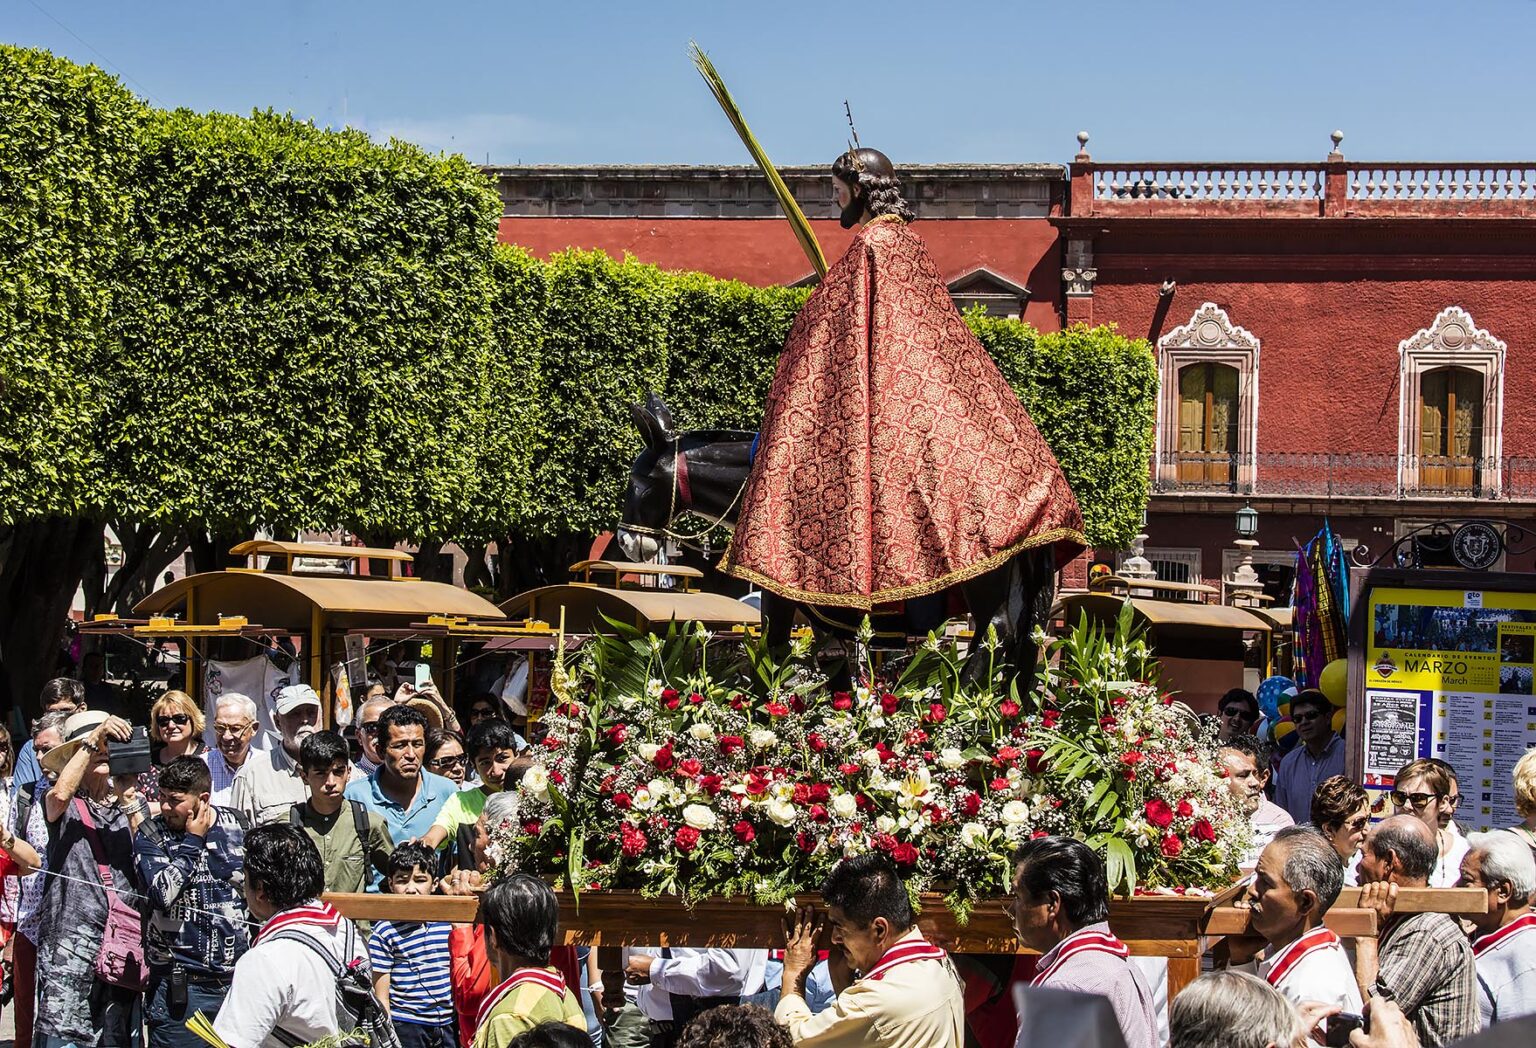 A statue of JESUS CHRIST is carried in the PALM SUNDAY PROCESSION from Parque Juarez to the Jardin - SAN MIGUEL DE ALLENDE, MEXICO